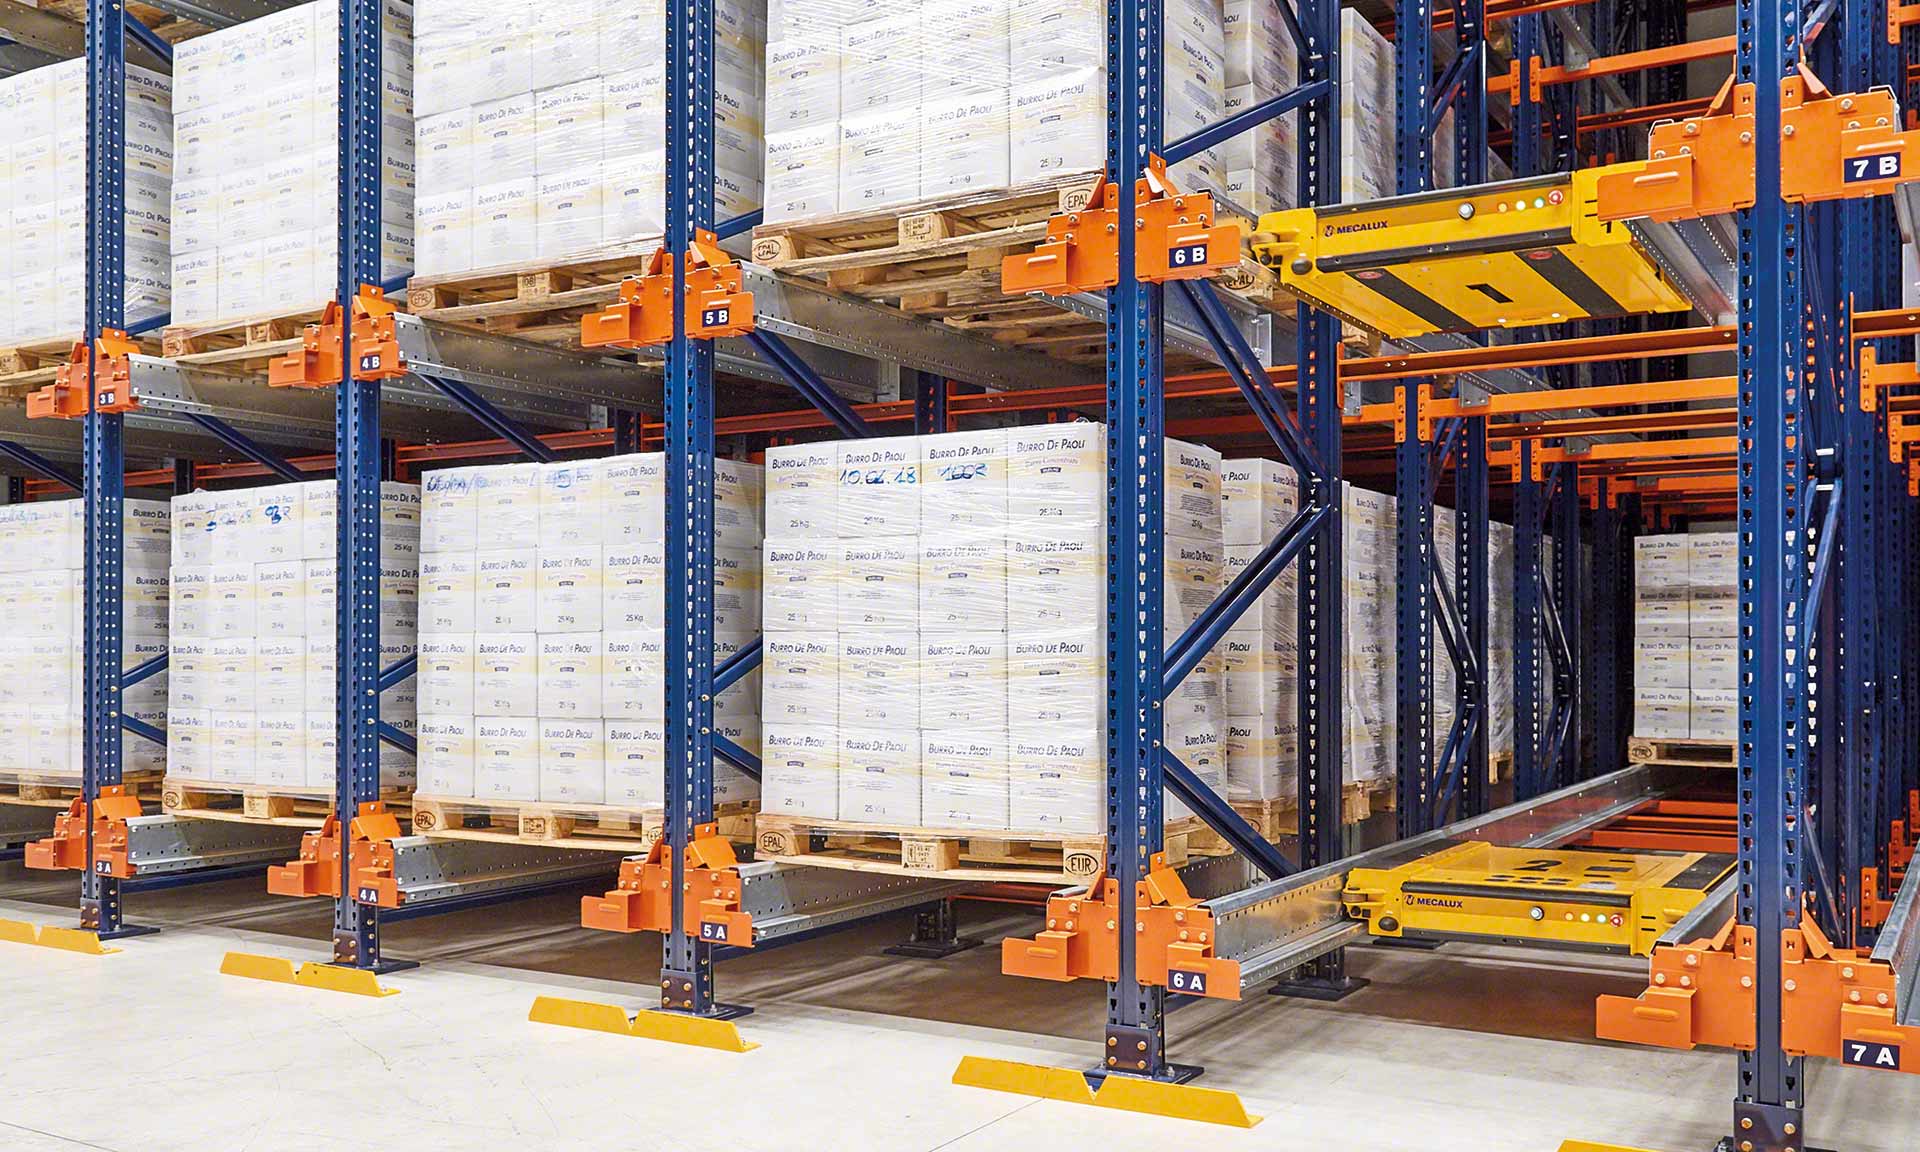 Palletising consists of placing goods on top of a pallet